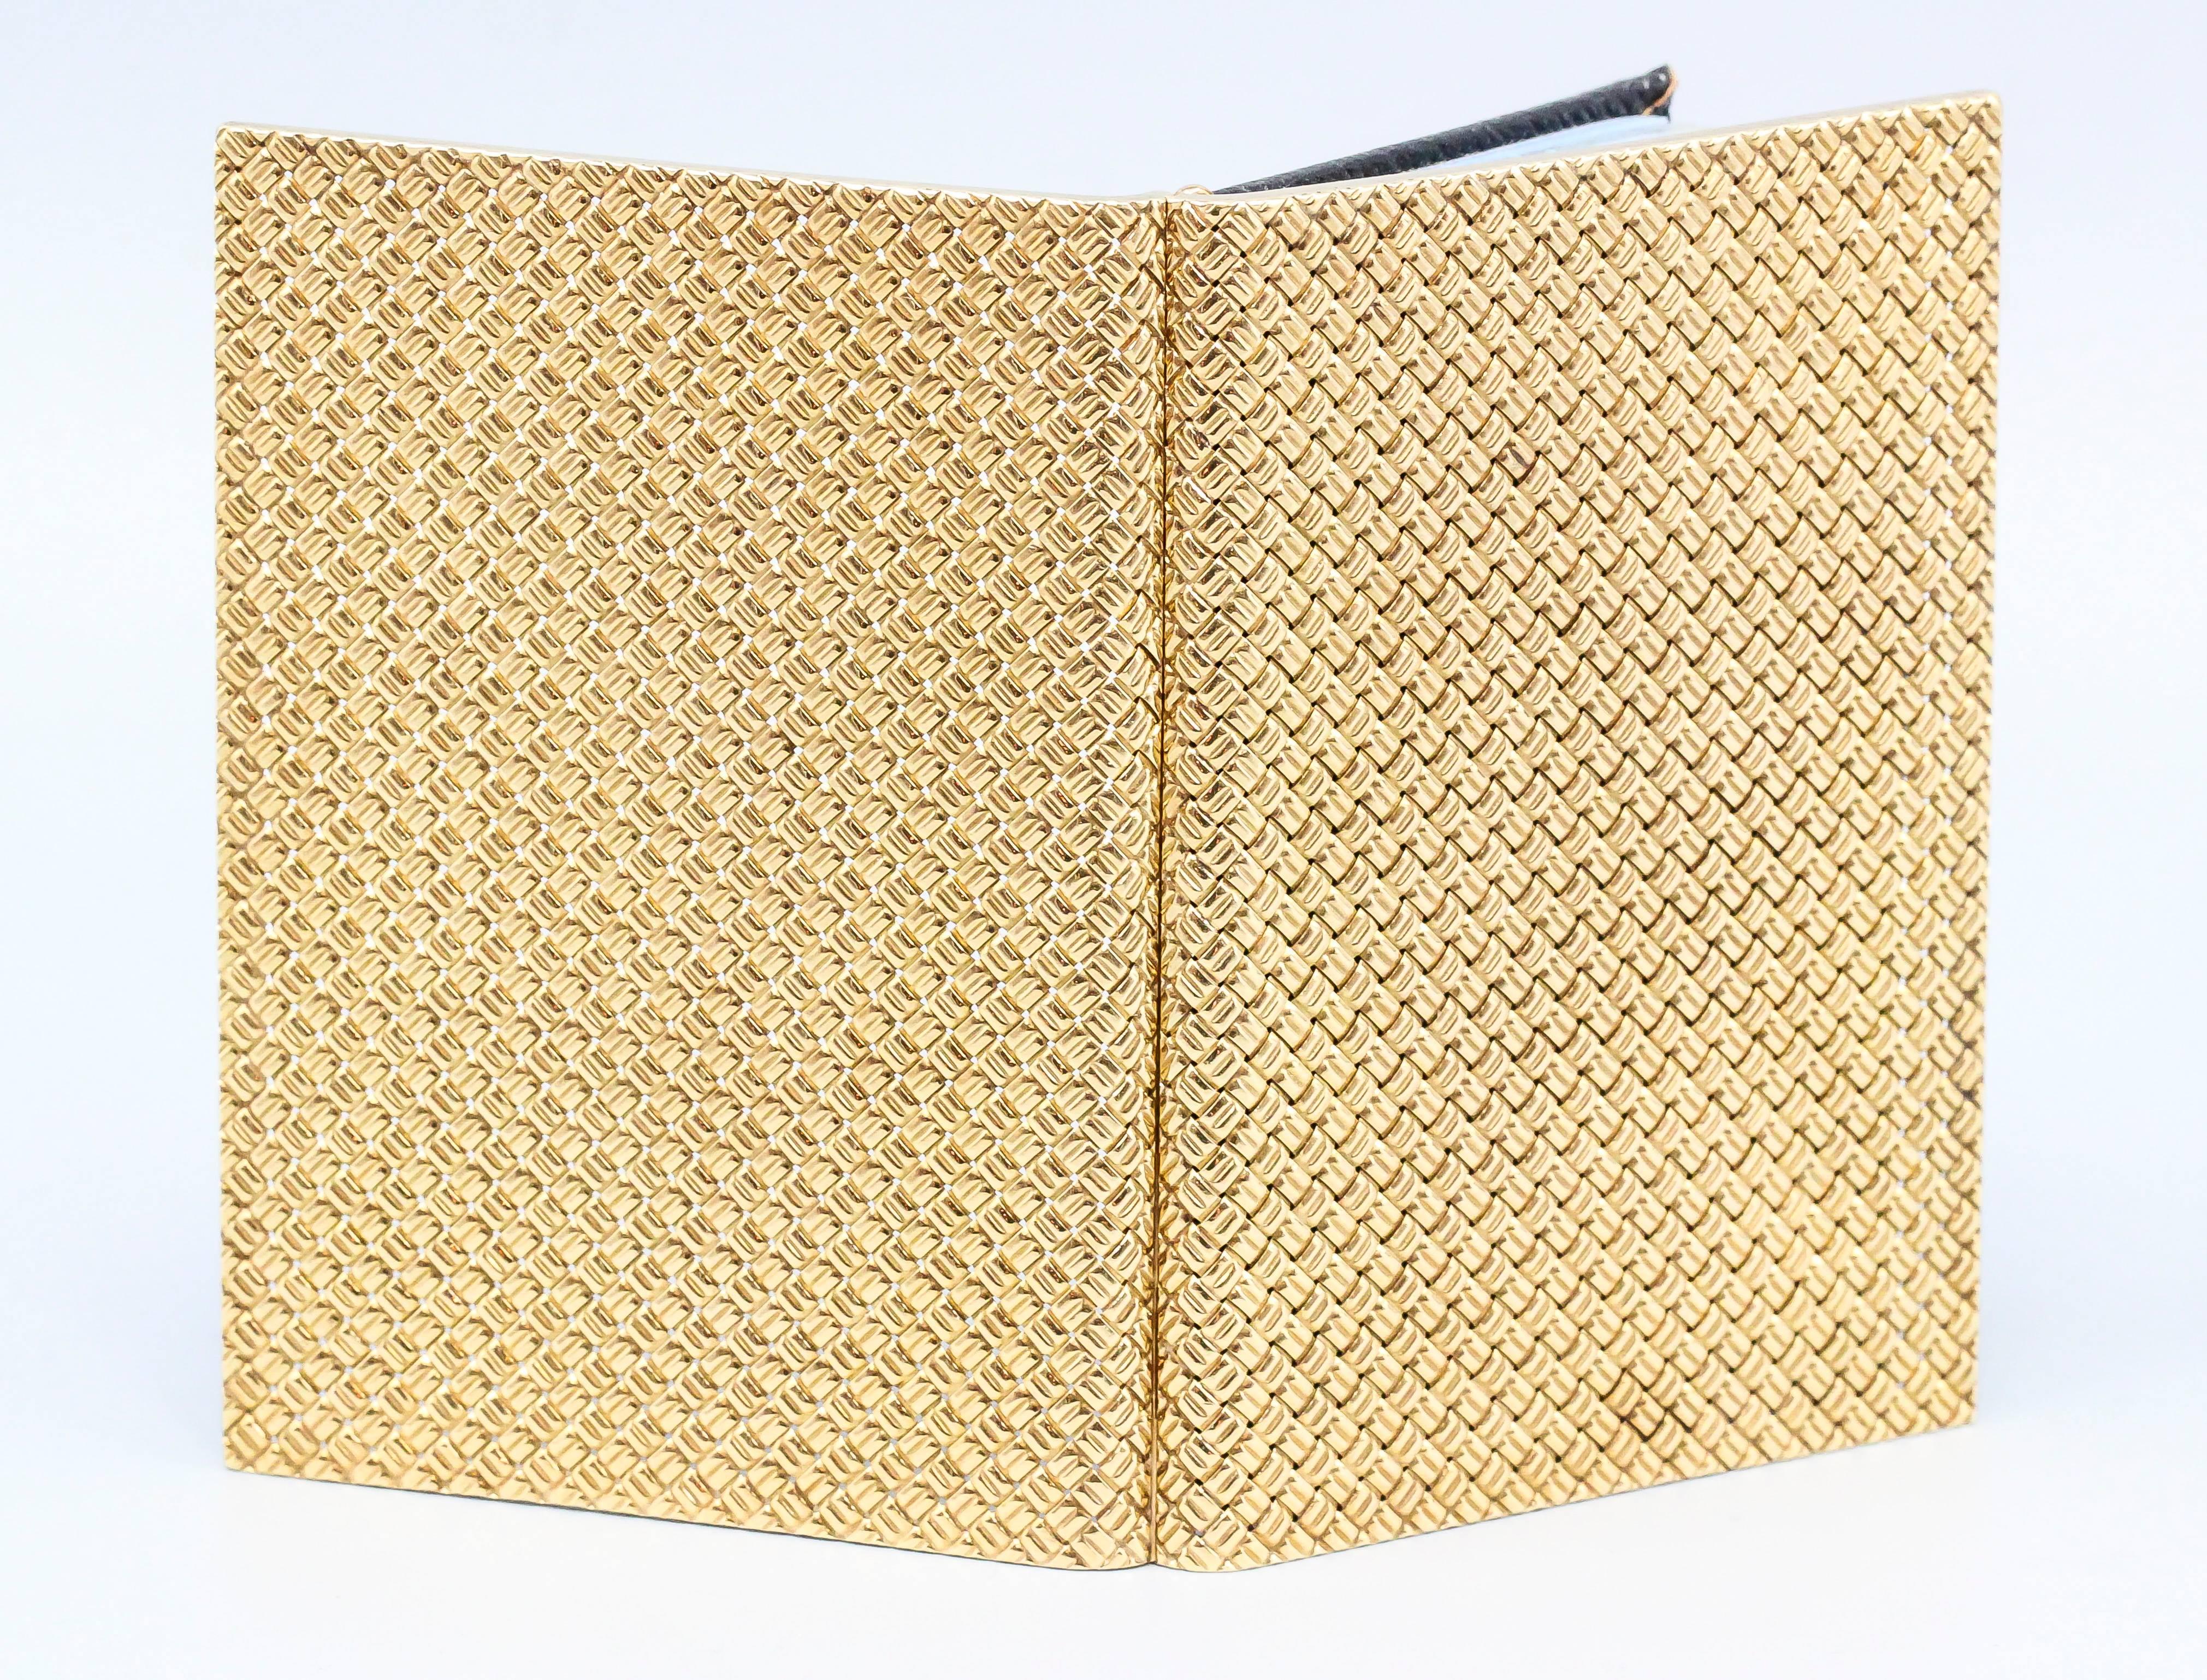 Rare and unusual 18K yellow gold address book by Van Cleef & Arpels, circa 1970s. Beautifully made with basket weave style design. Dated 1977 on address book, which also features a calendar, can easily be updated for the current year or used for any